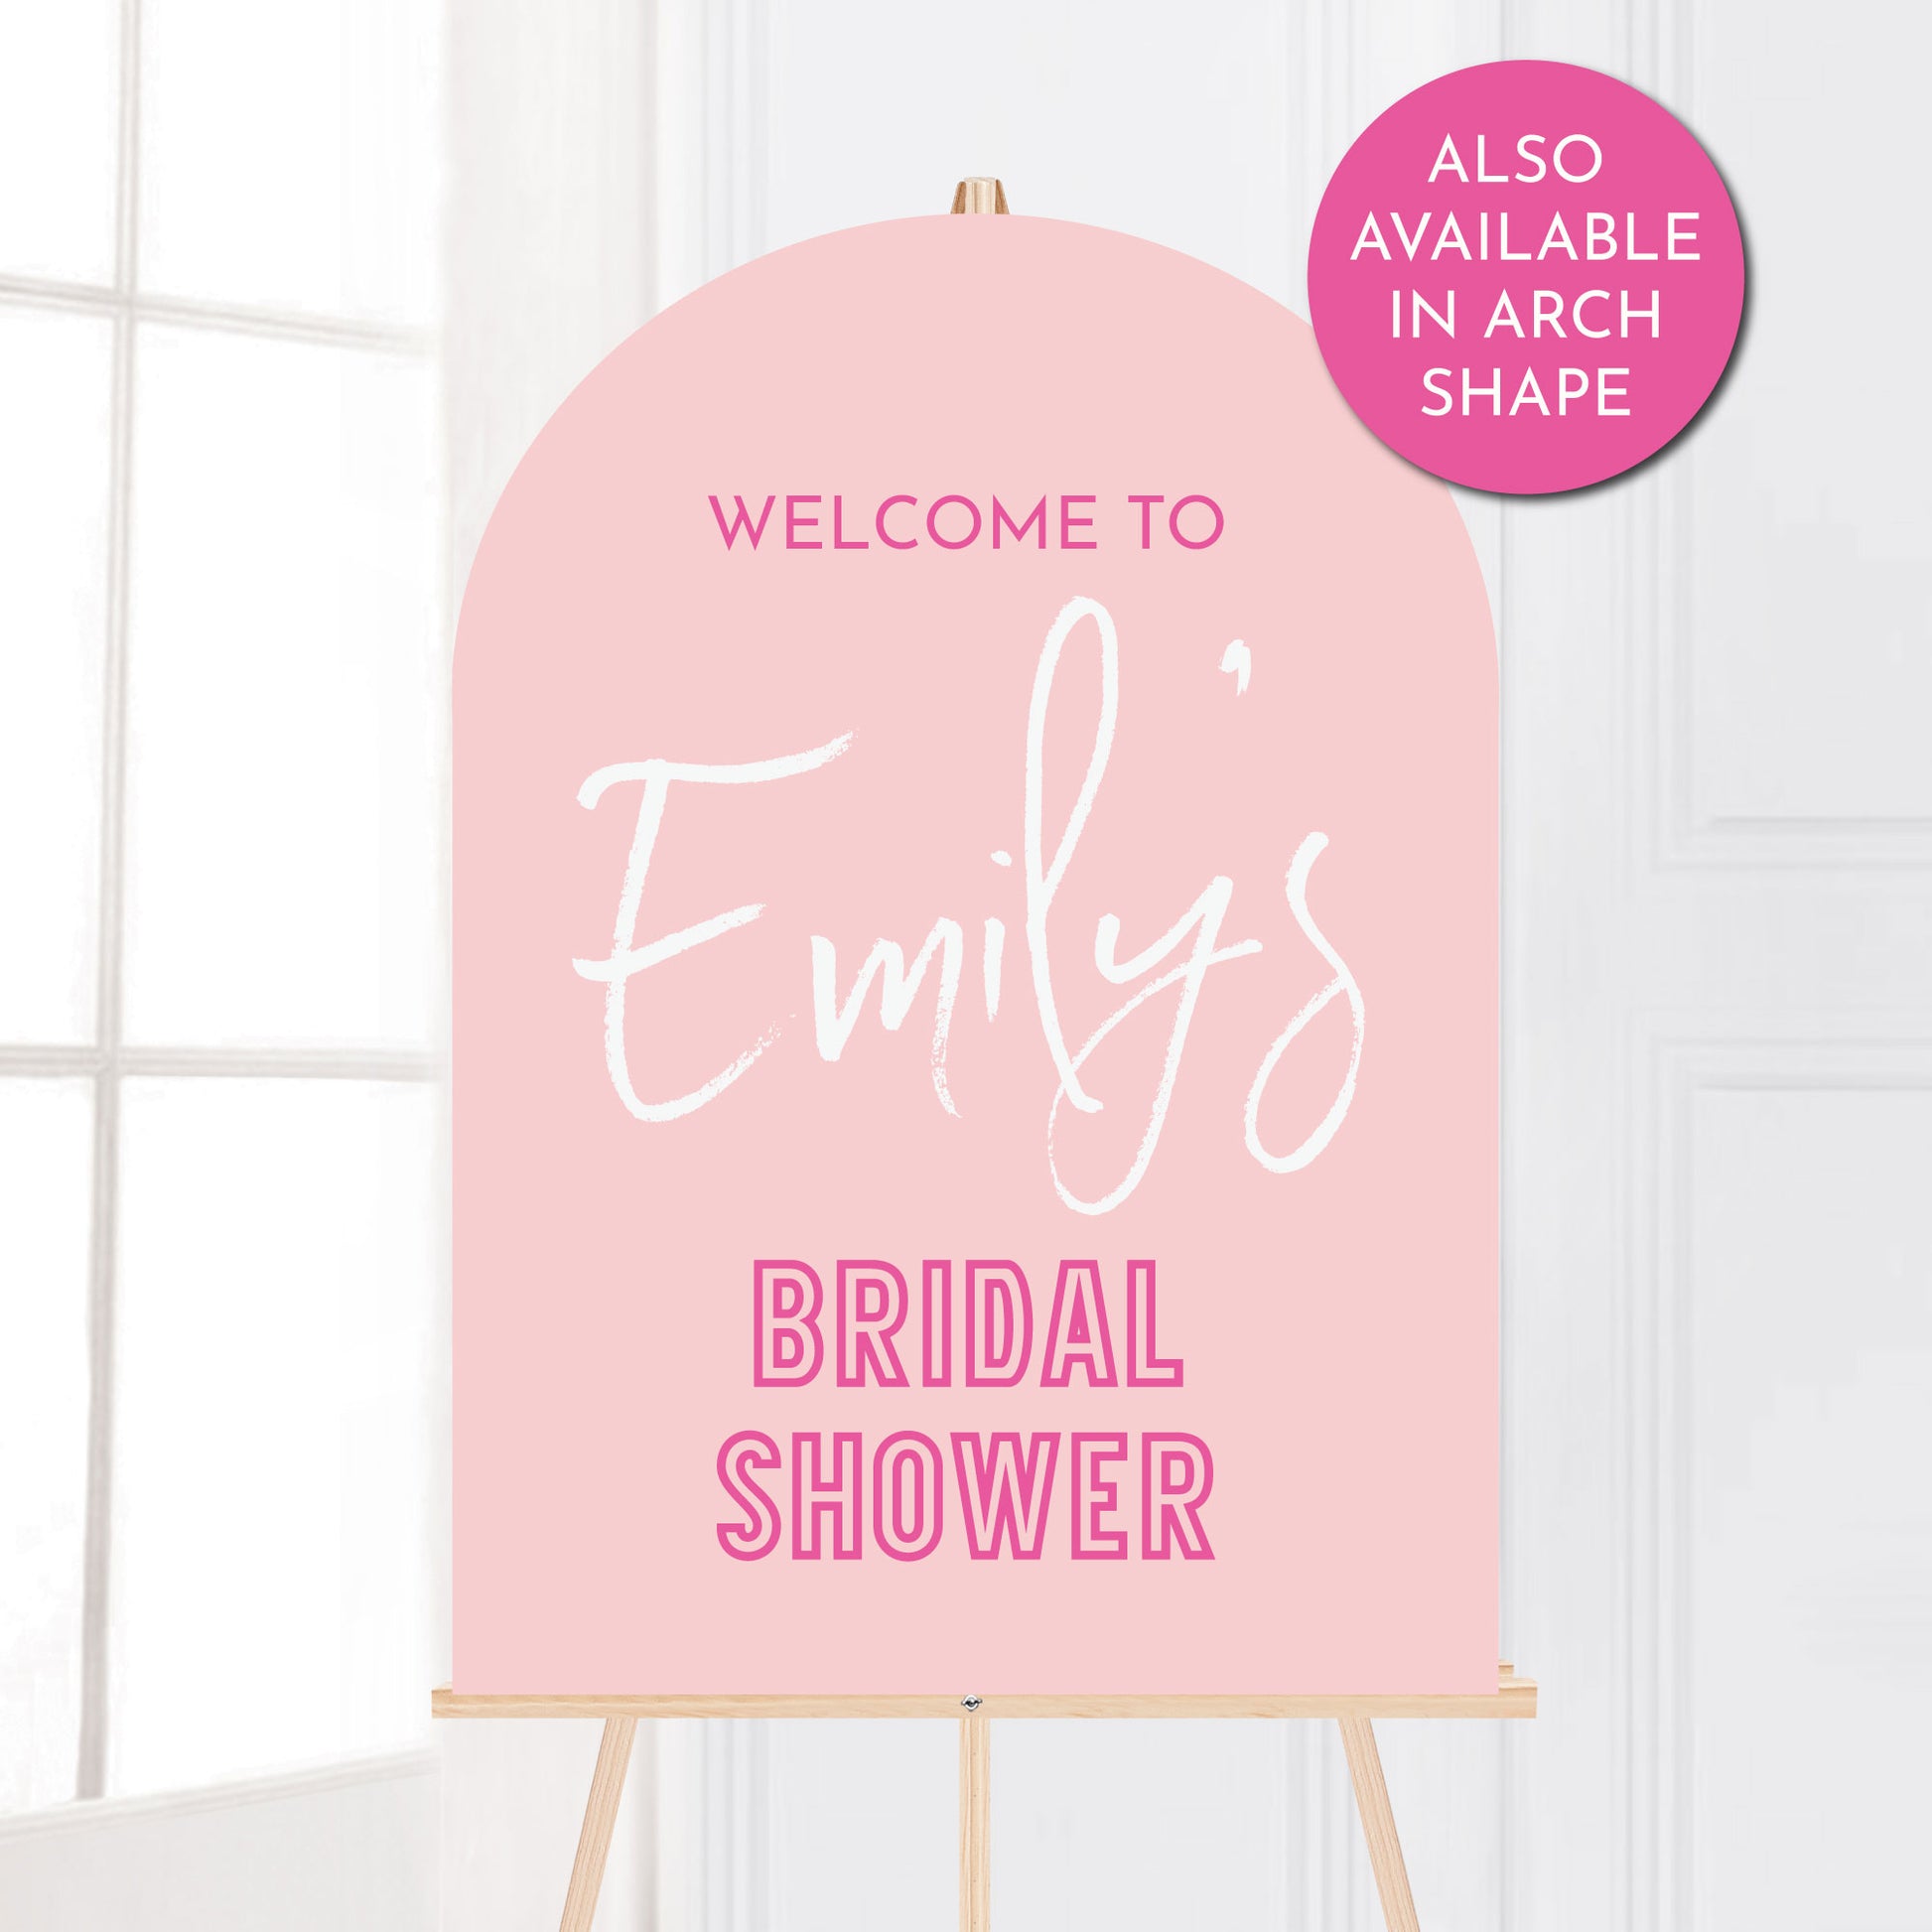 Emily Wave A1 PVC Foamcore Sign - All text and colours customisable to suit any event - Glitzy Prints